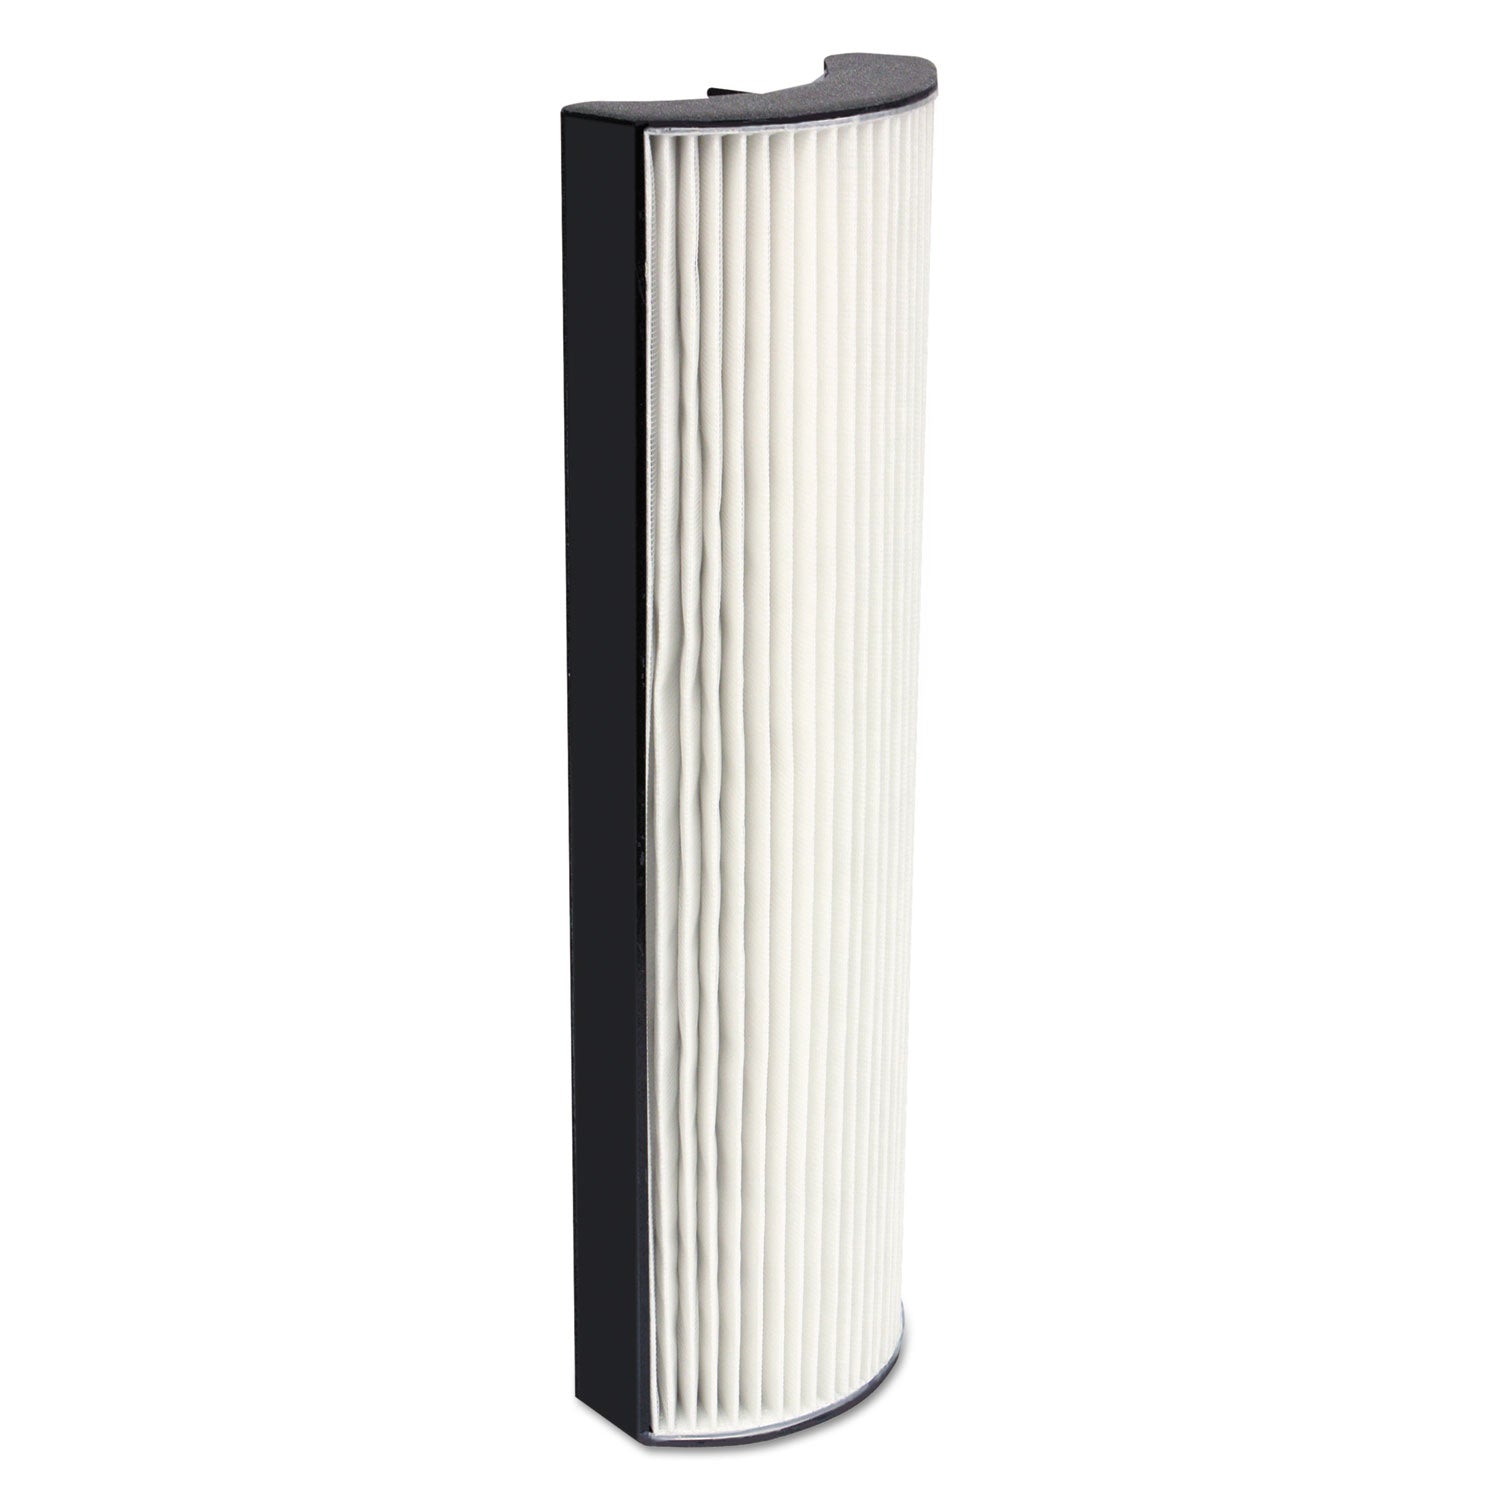 replacement-filter-for-allergy-pro-200-air-purifier-5-x-17_ion10ap200rf01 - 1